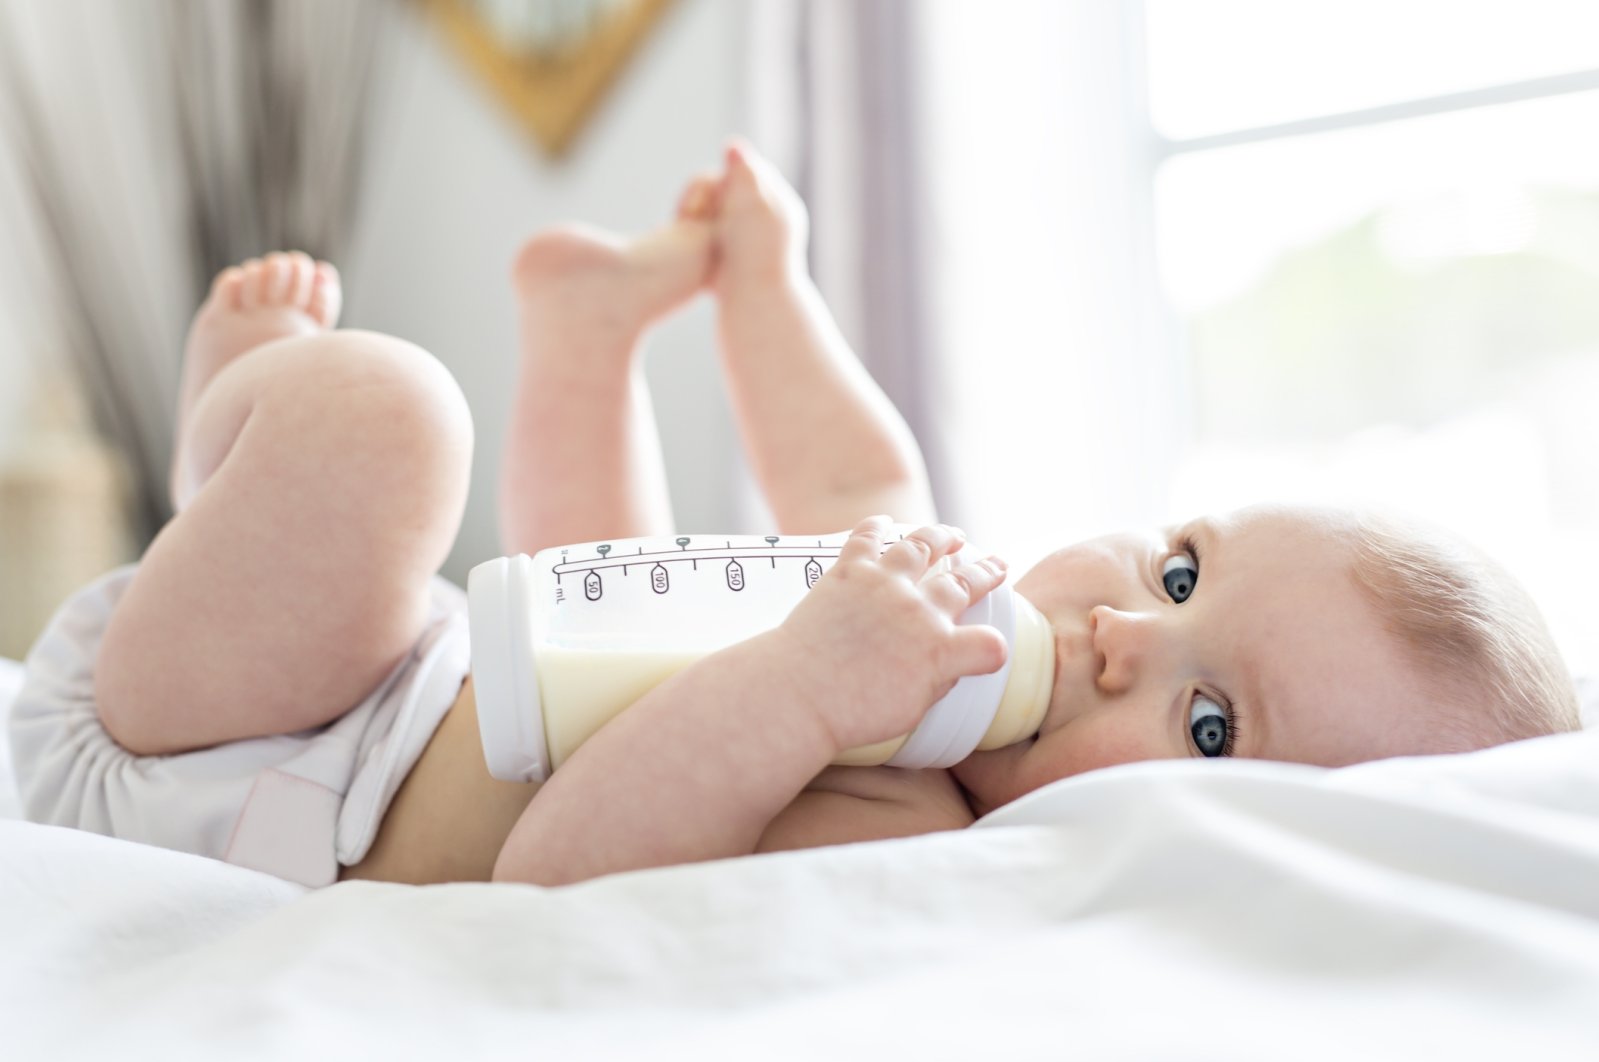 The study shows that plastic baby bottles, when heated or shaken, can release microplastics into liquid. (iStock Photo)